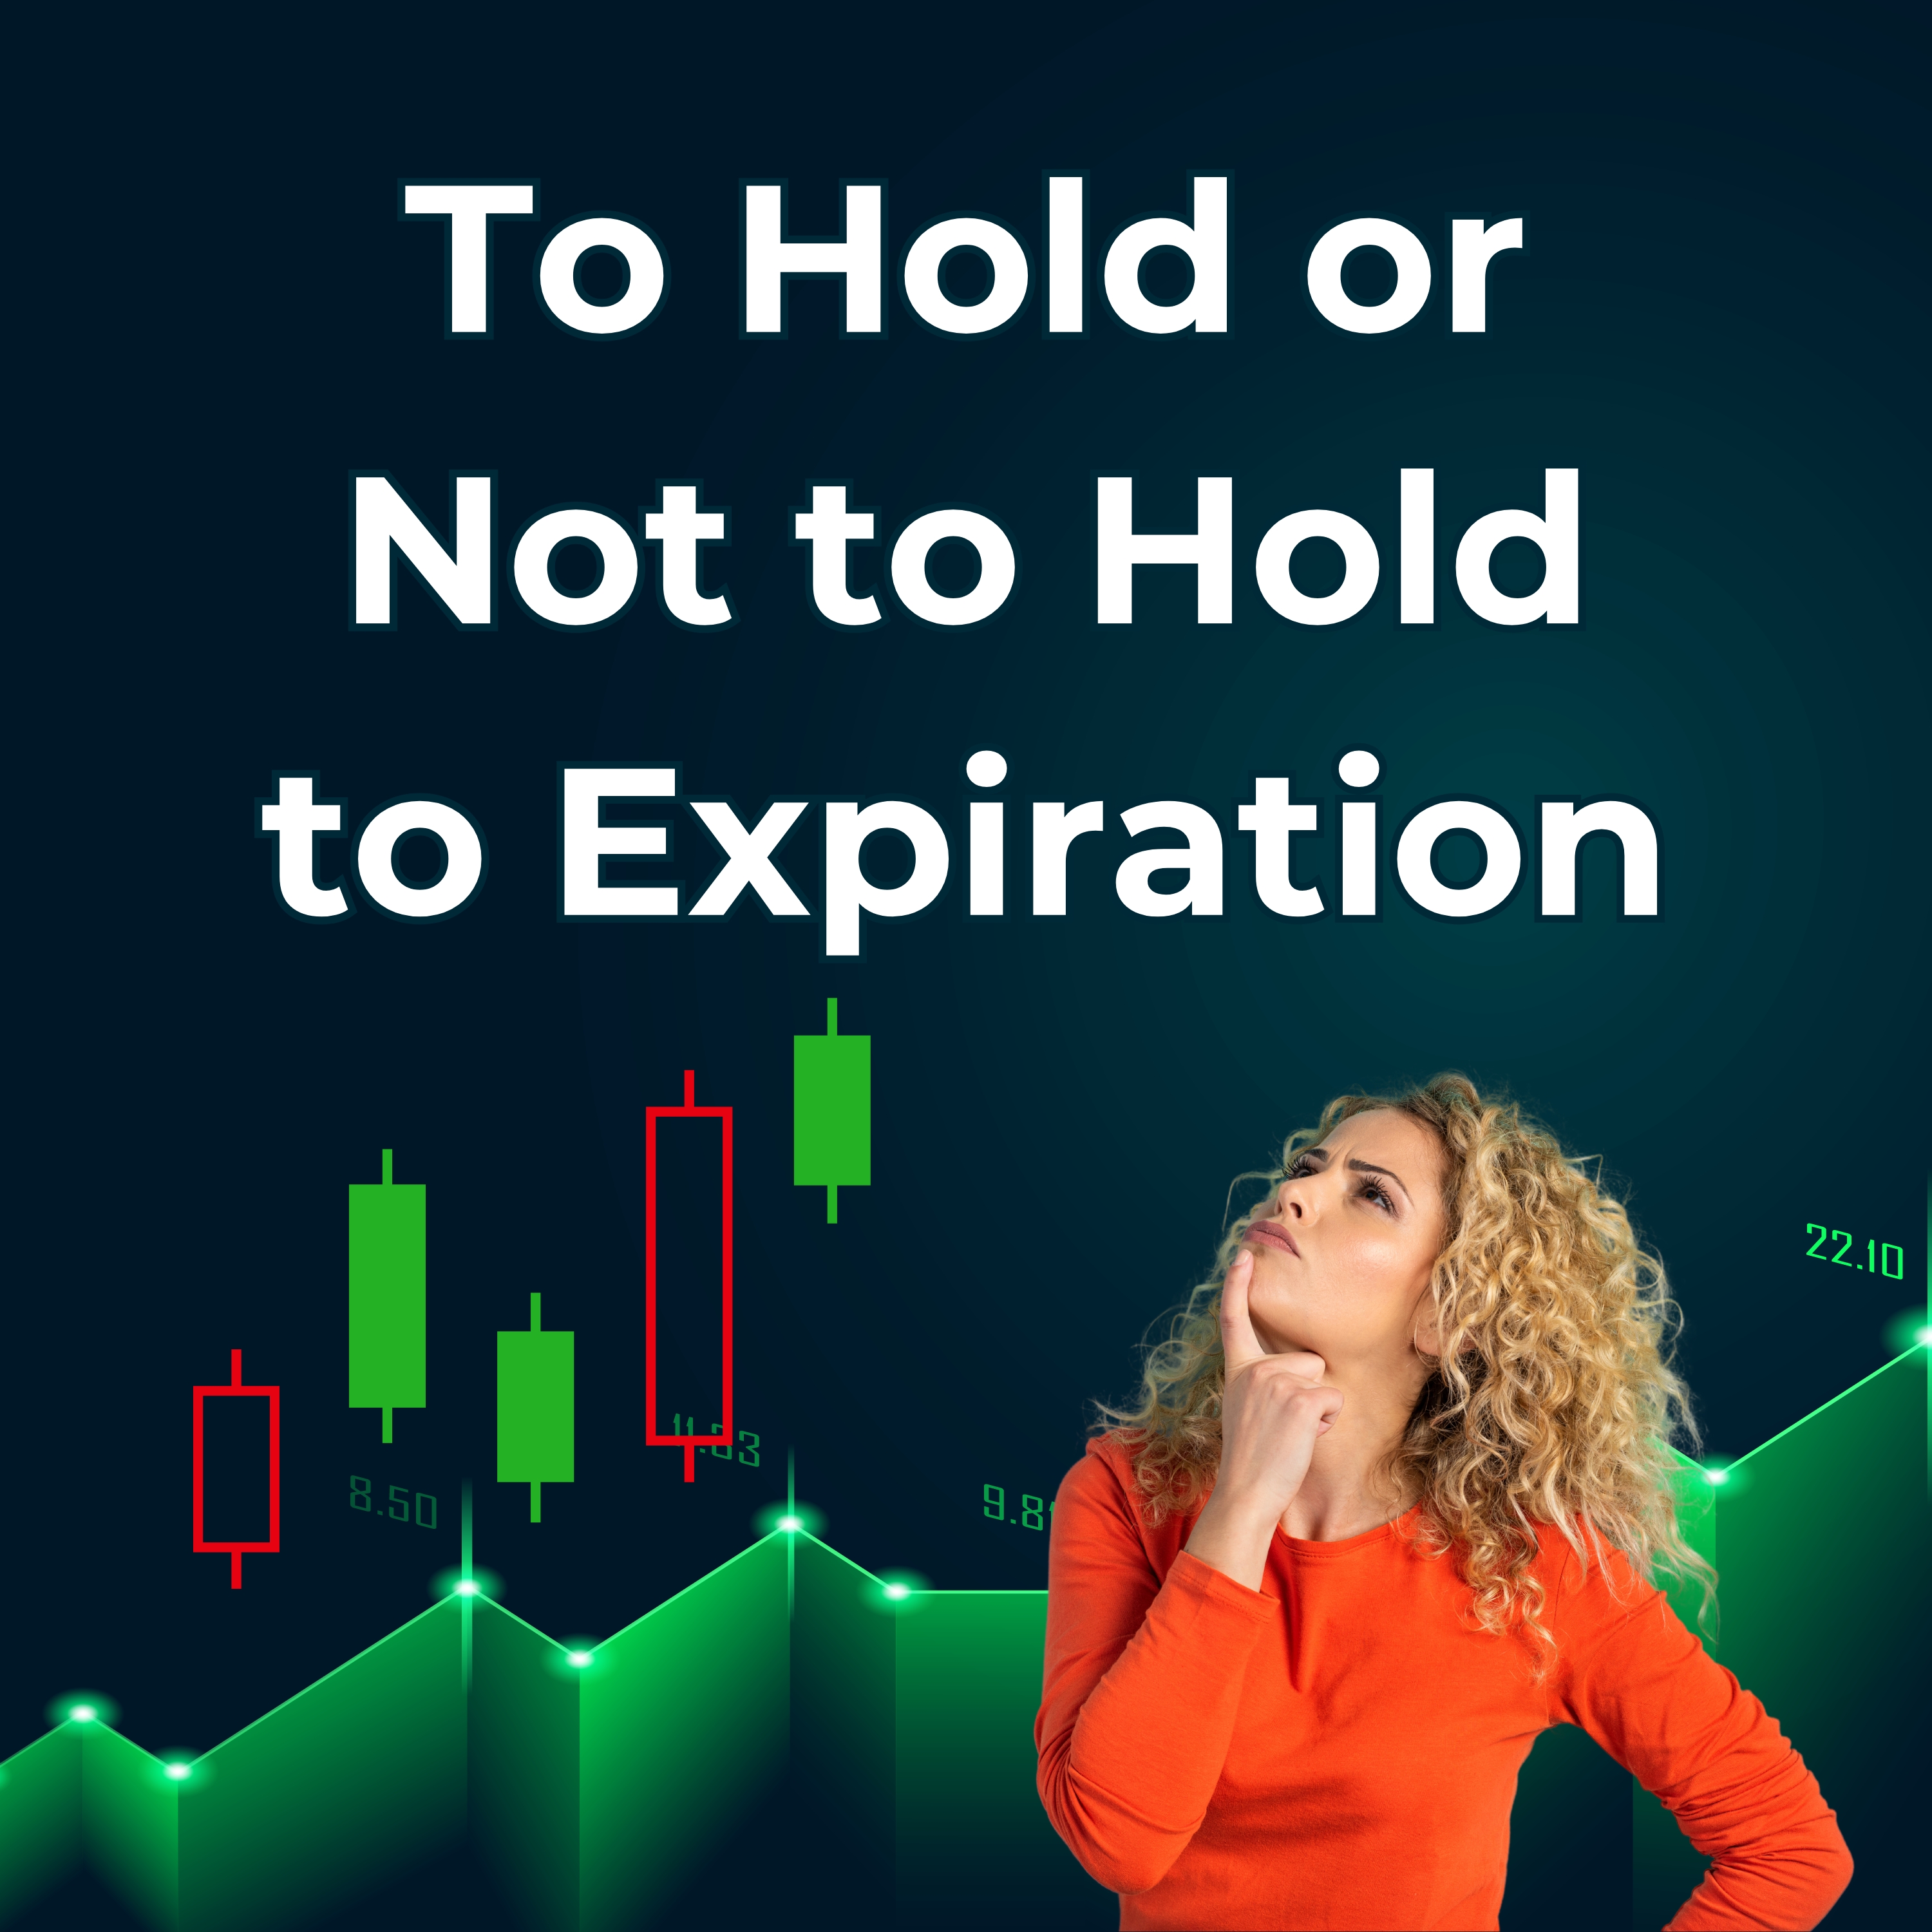 111: To Hold or Not to Hold to Expiration